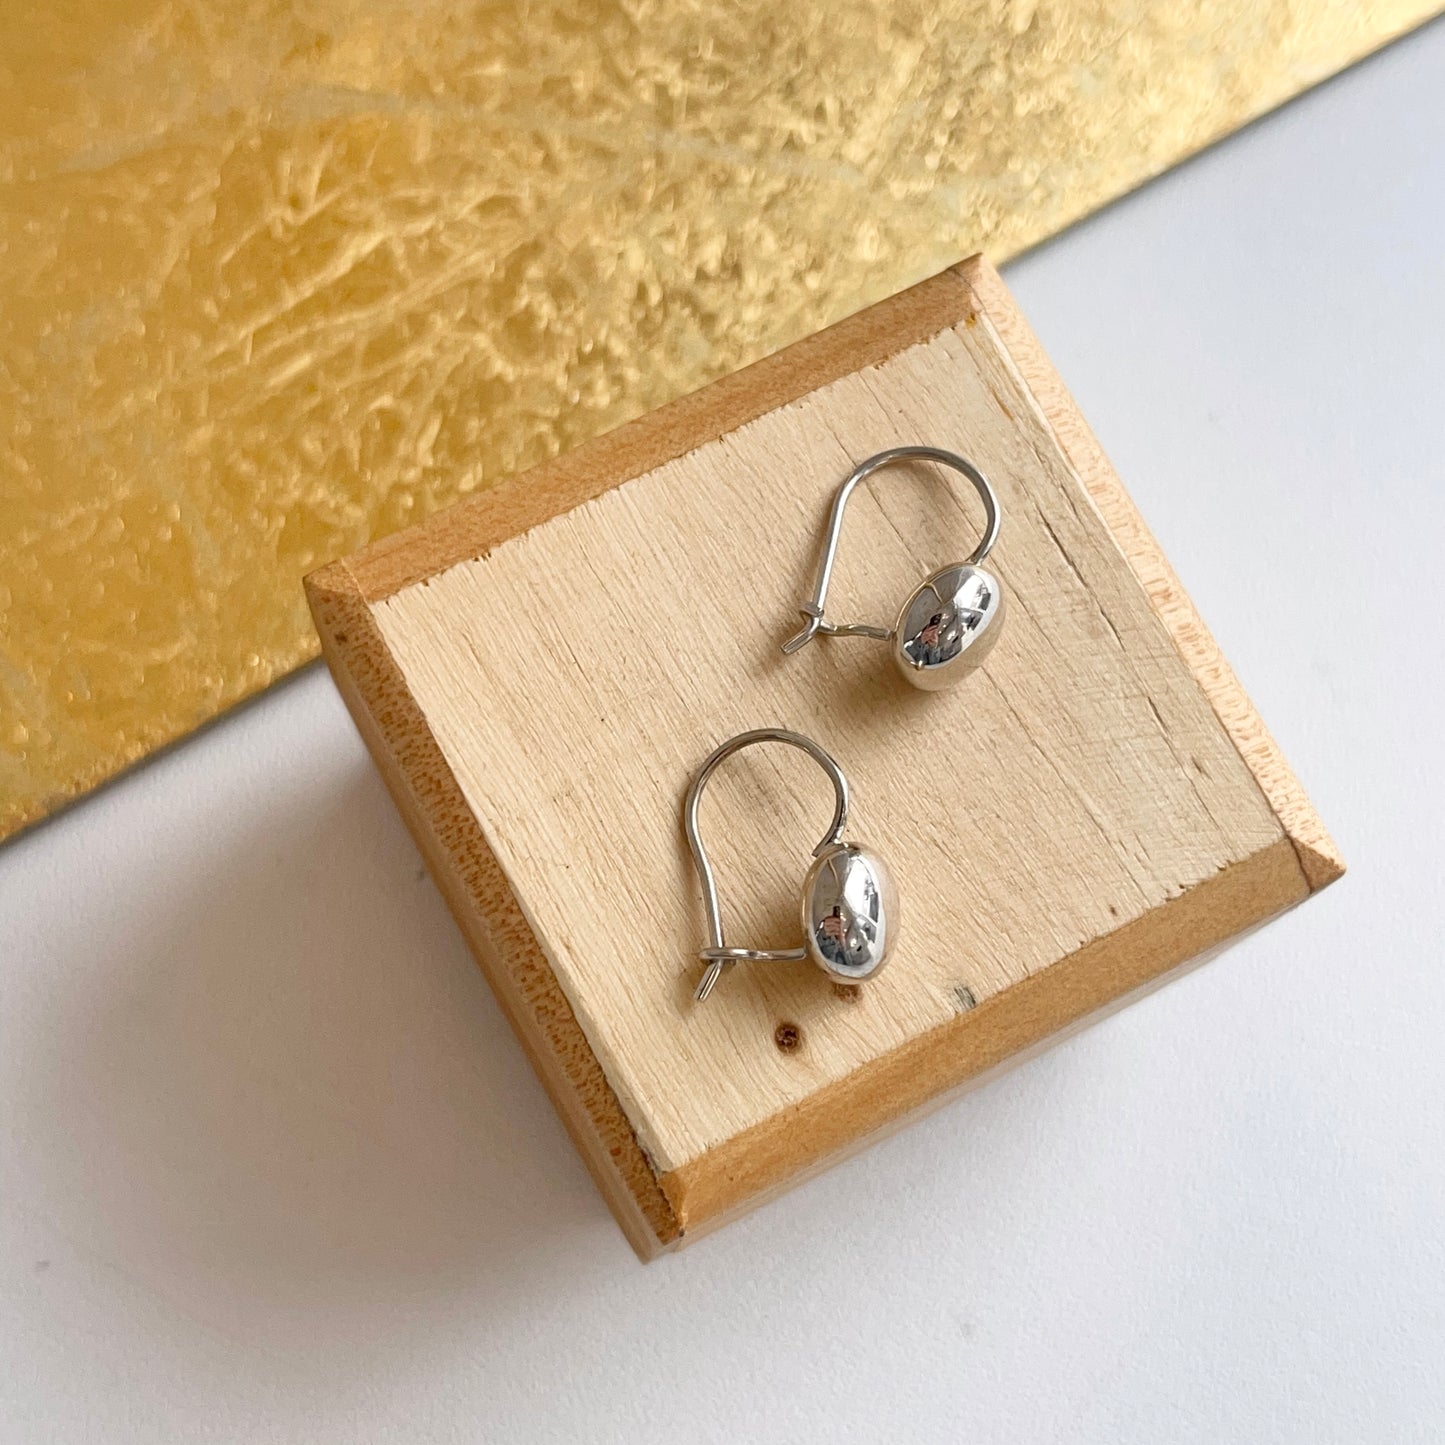 14KT White Gold 8mm Button Ball Kidney Wire Earrings